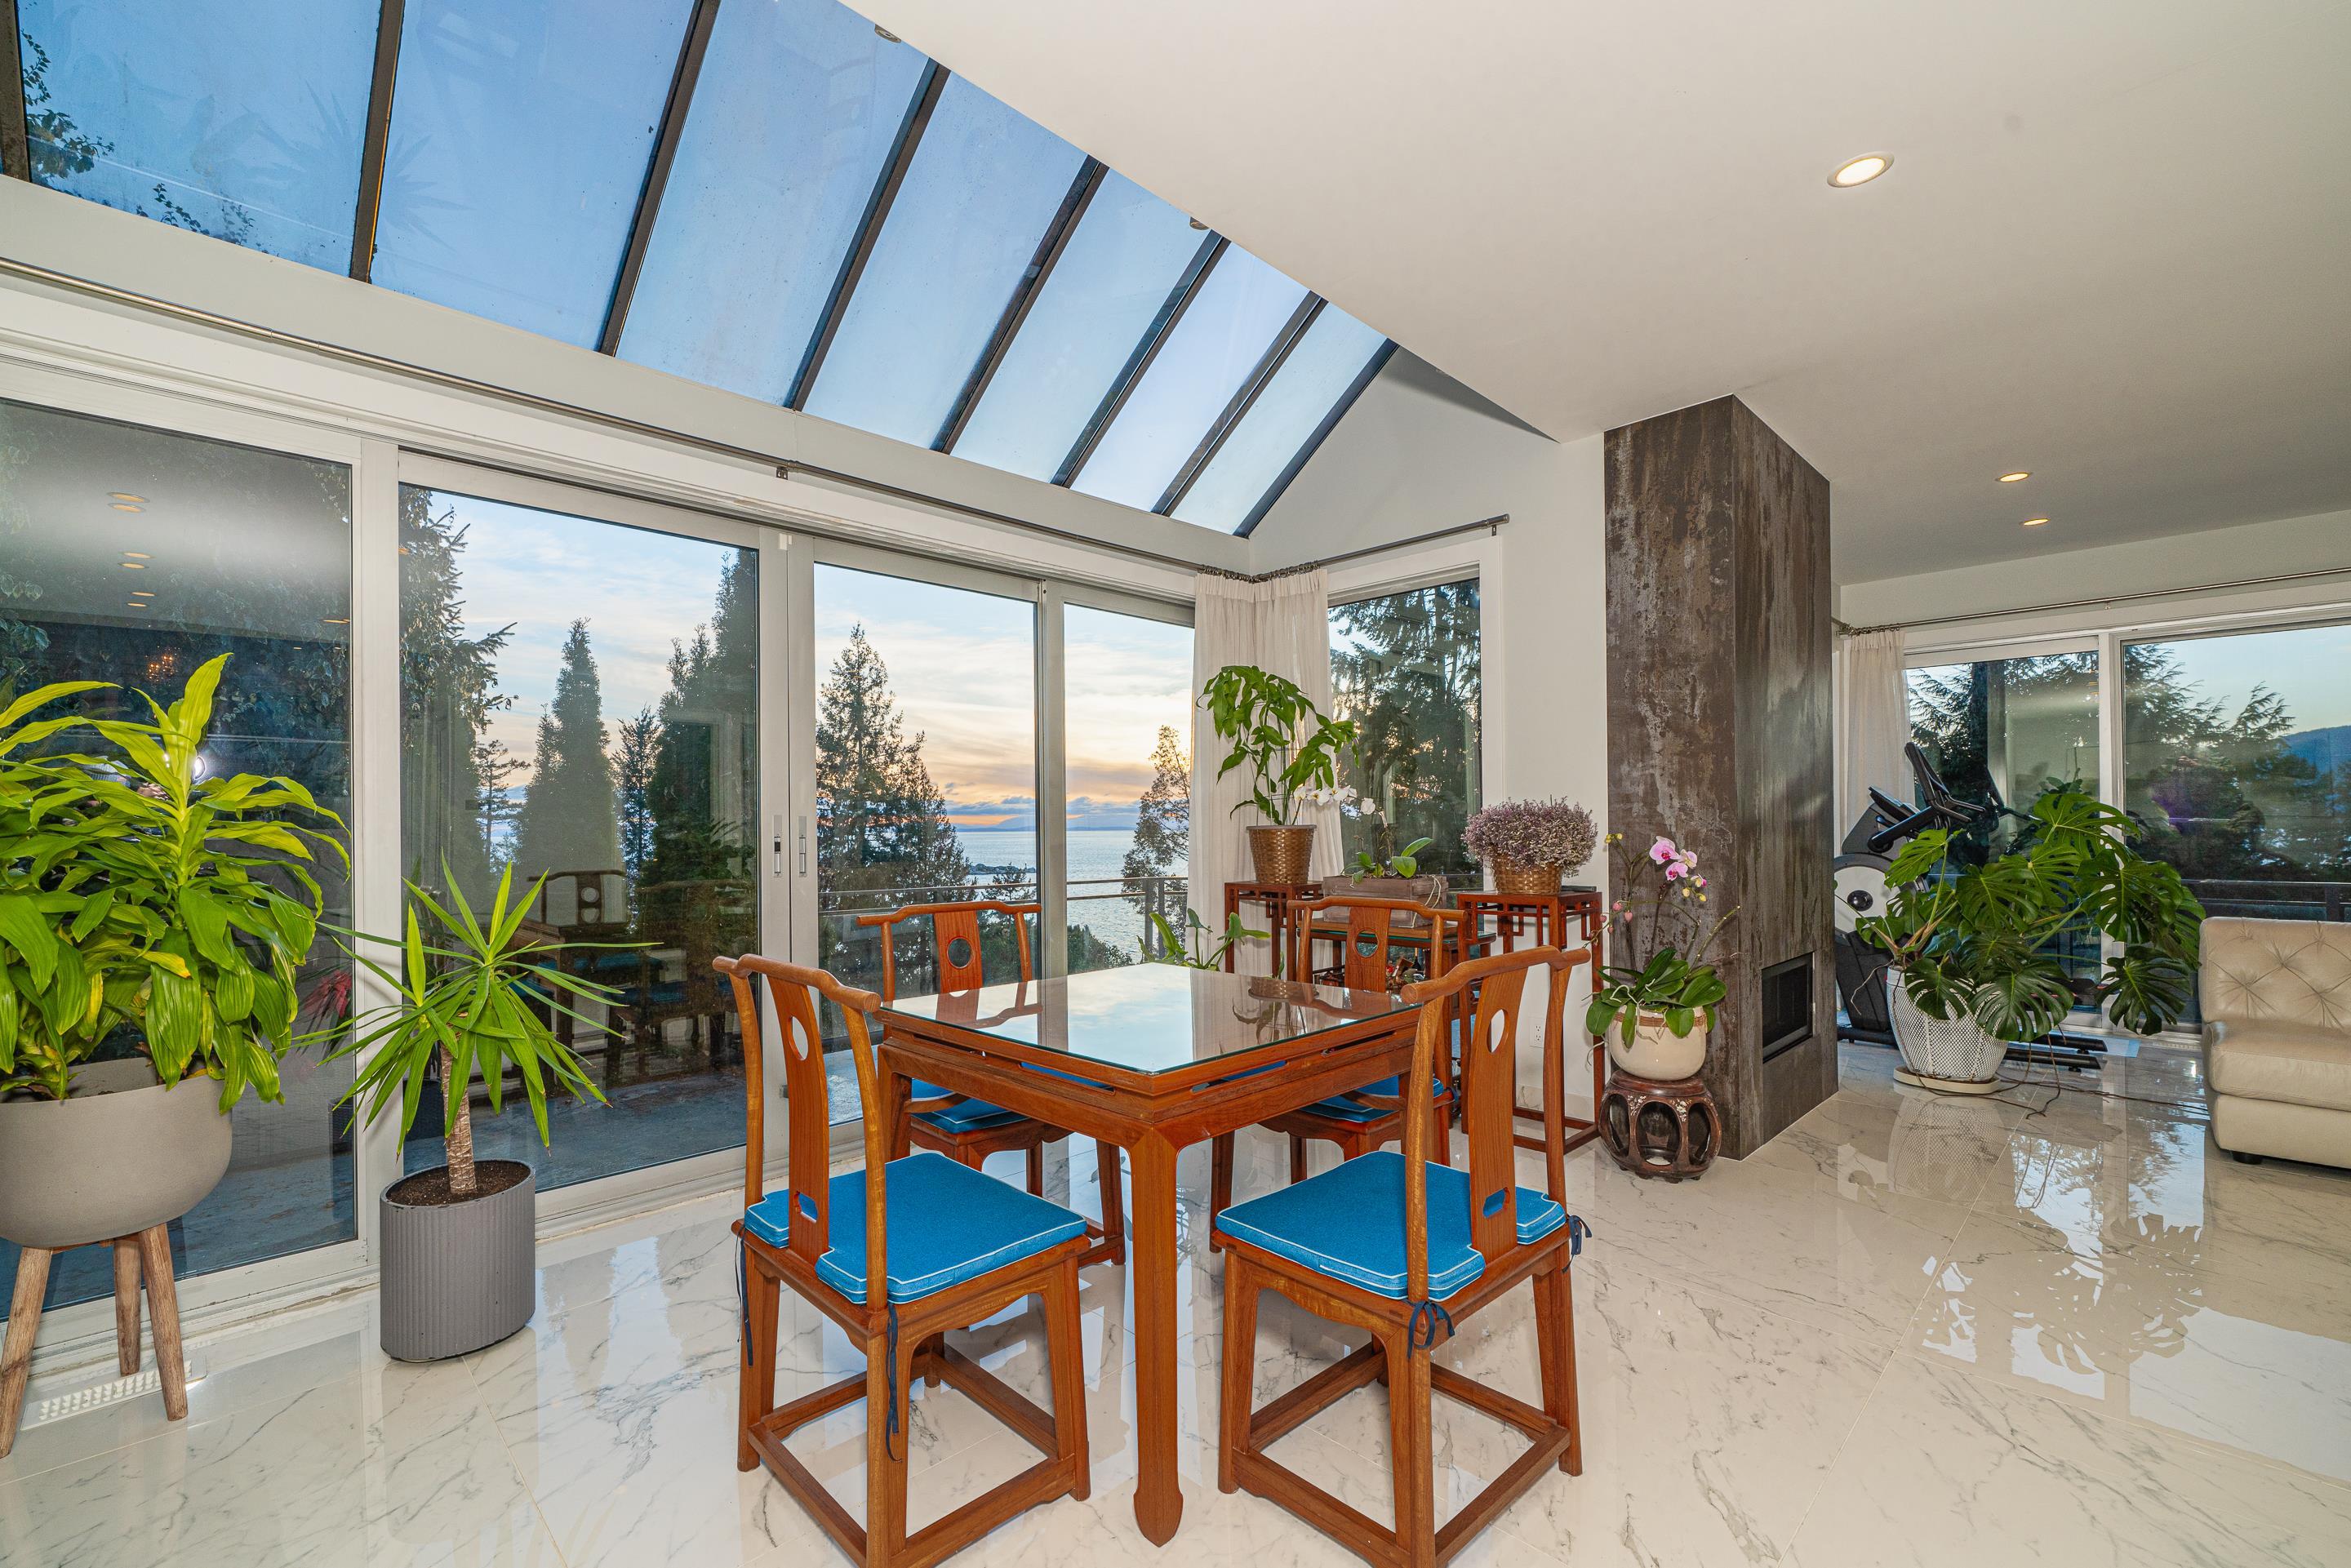 Listing image of 5290 GULF PLACE